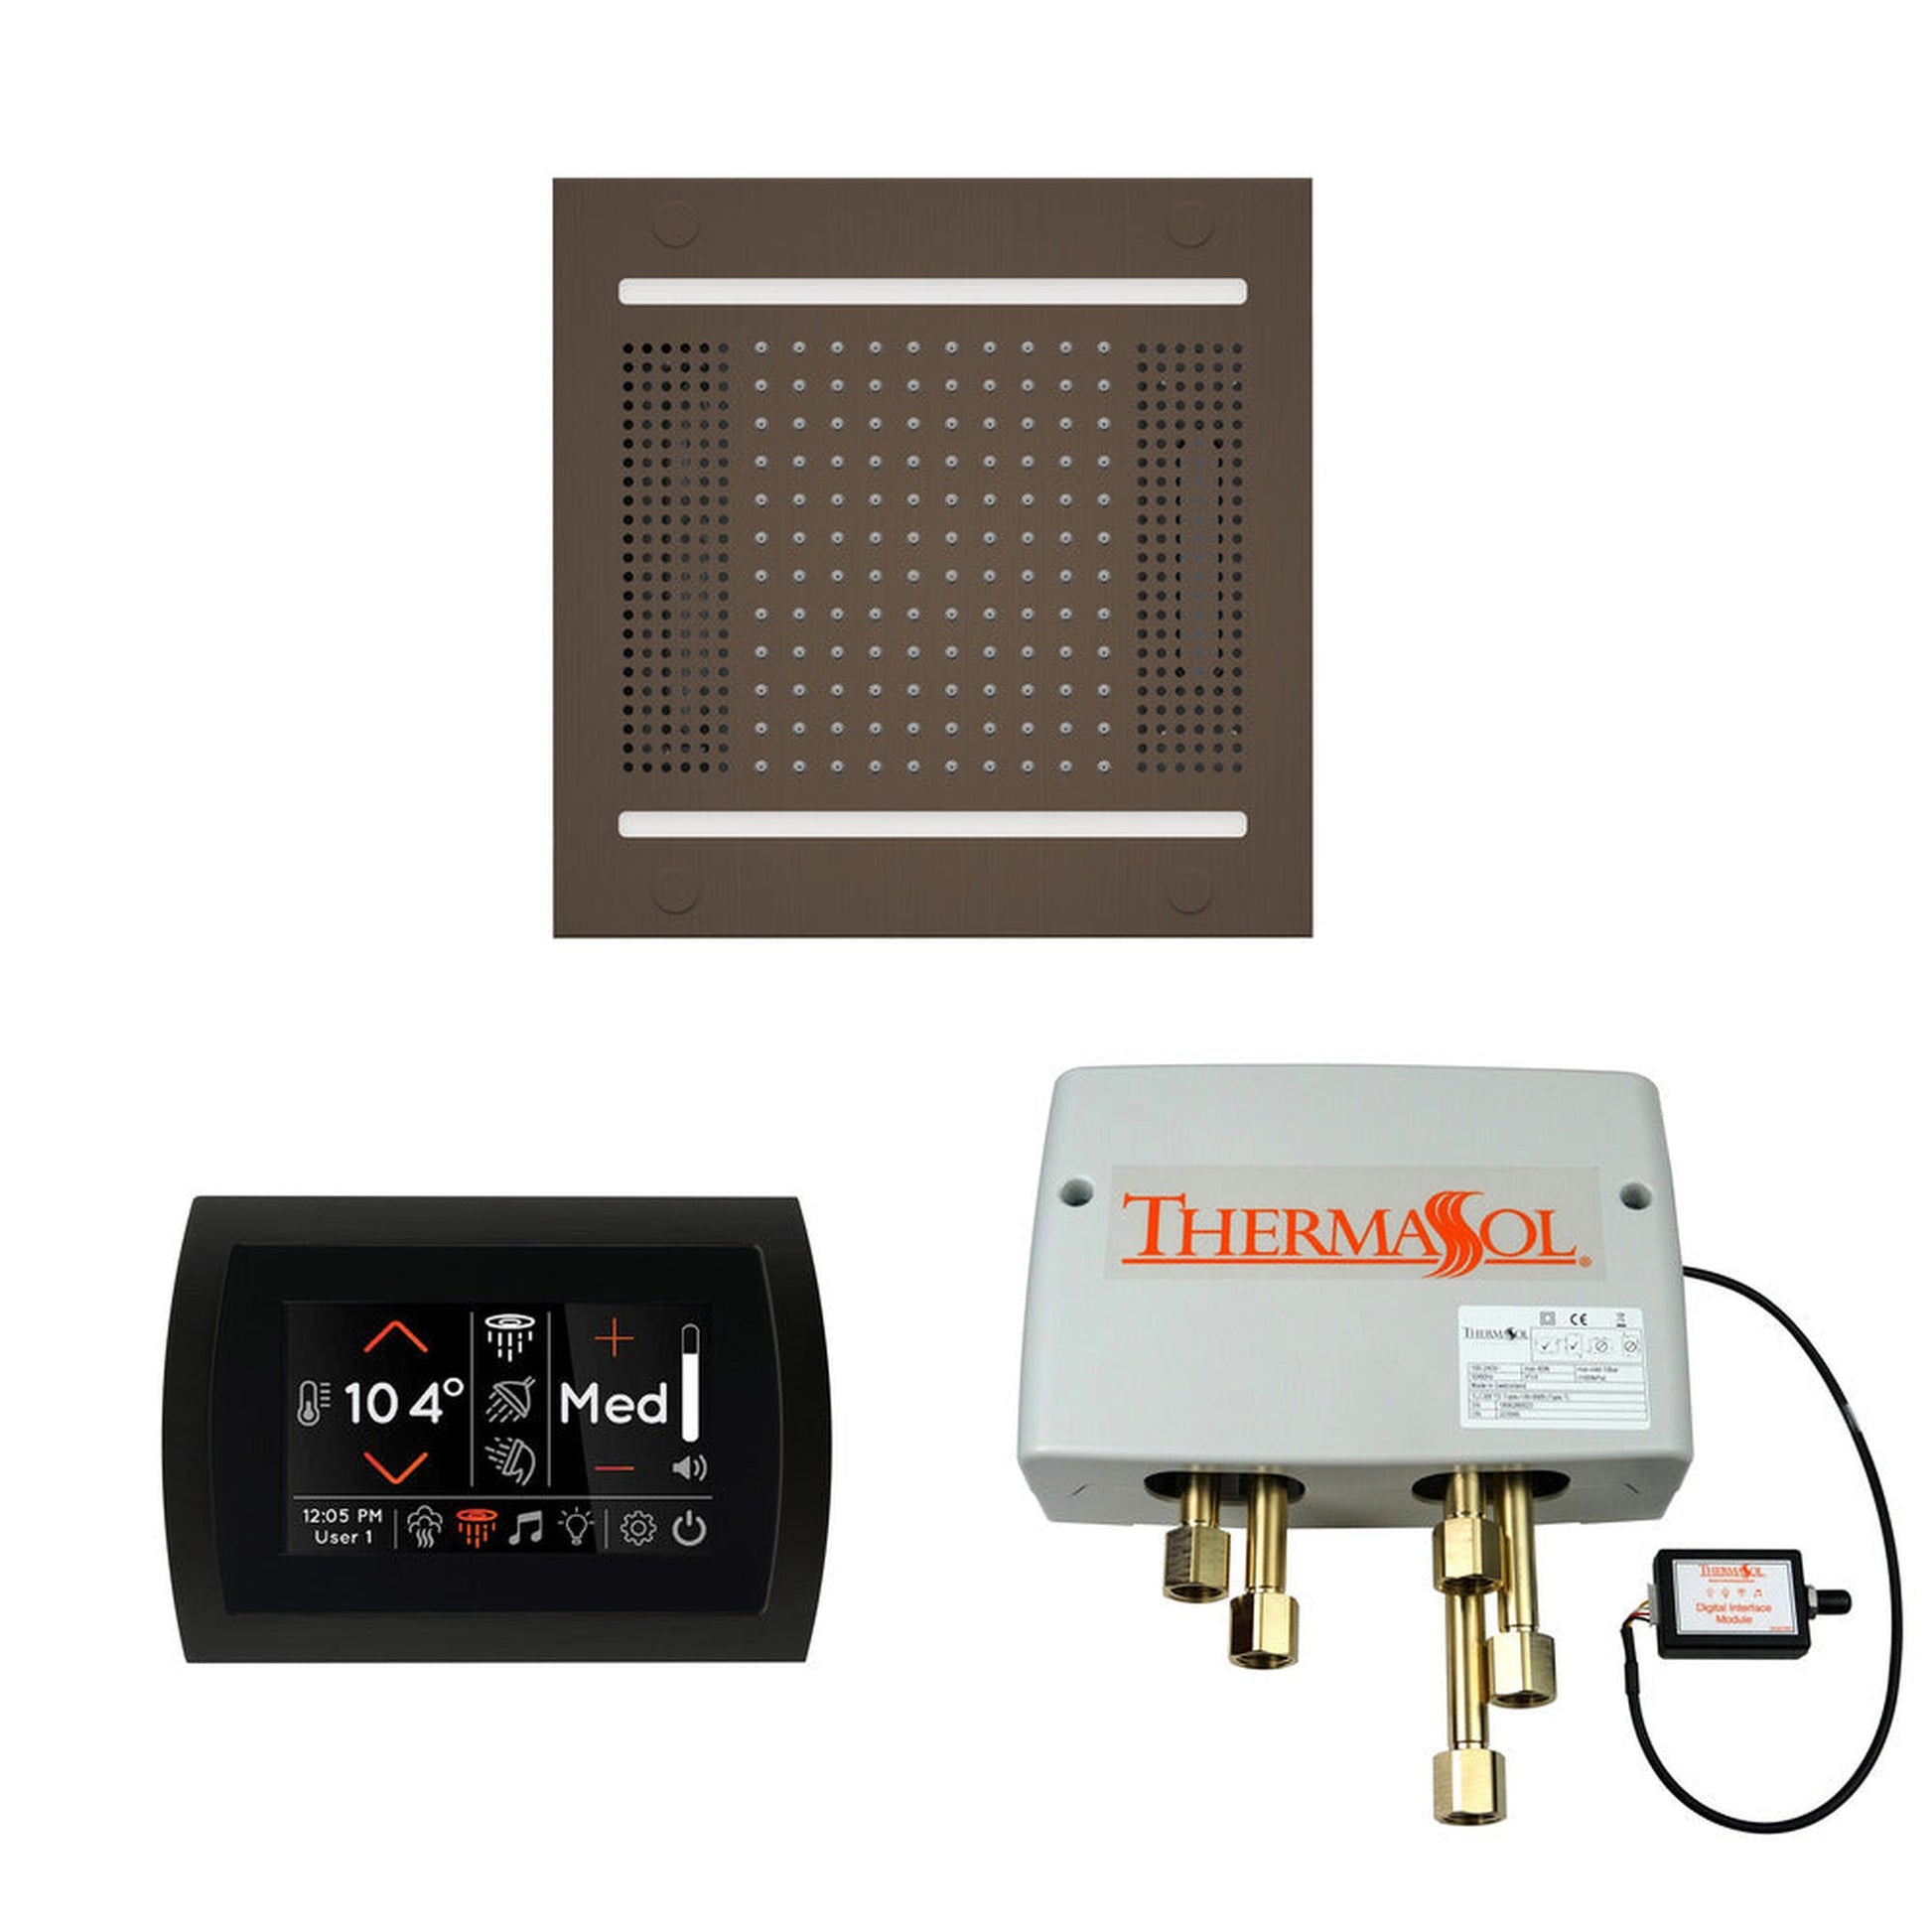 ThermaSol The Wellness Oil Rubbed Bronze Finish Hydrovive14 Shower Package with 5" Flushmount SignaTouch